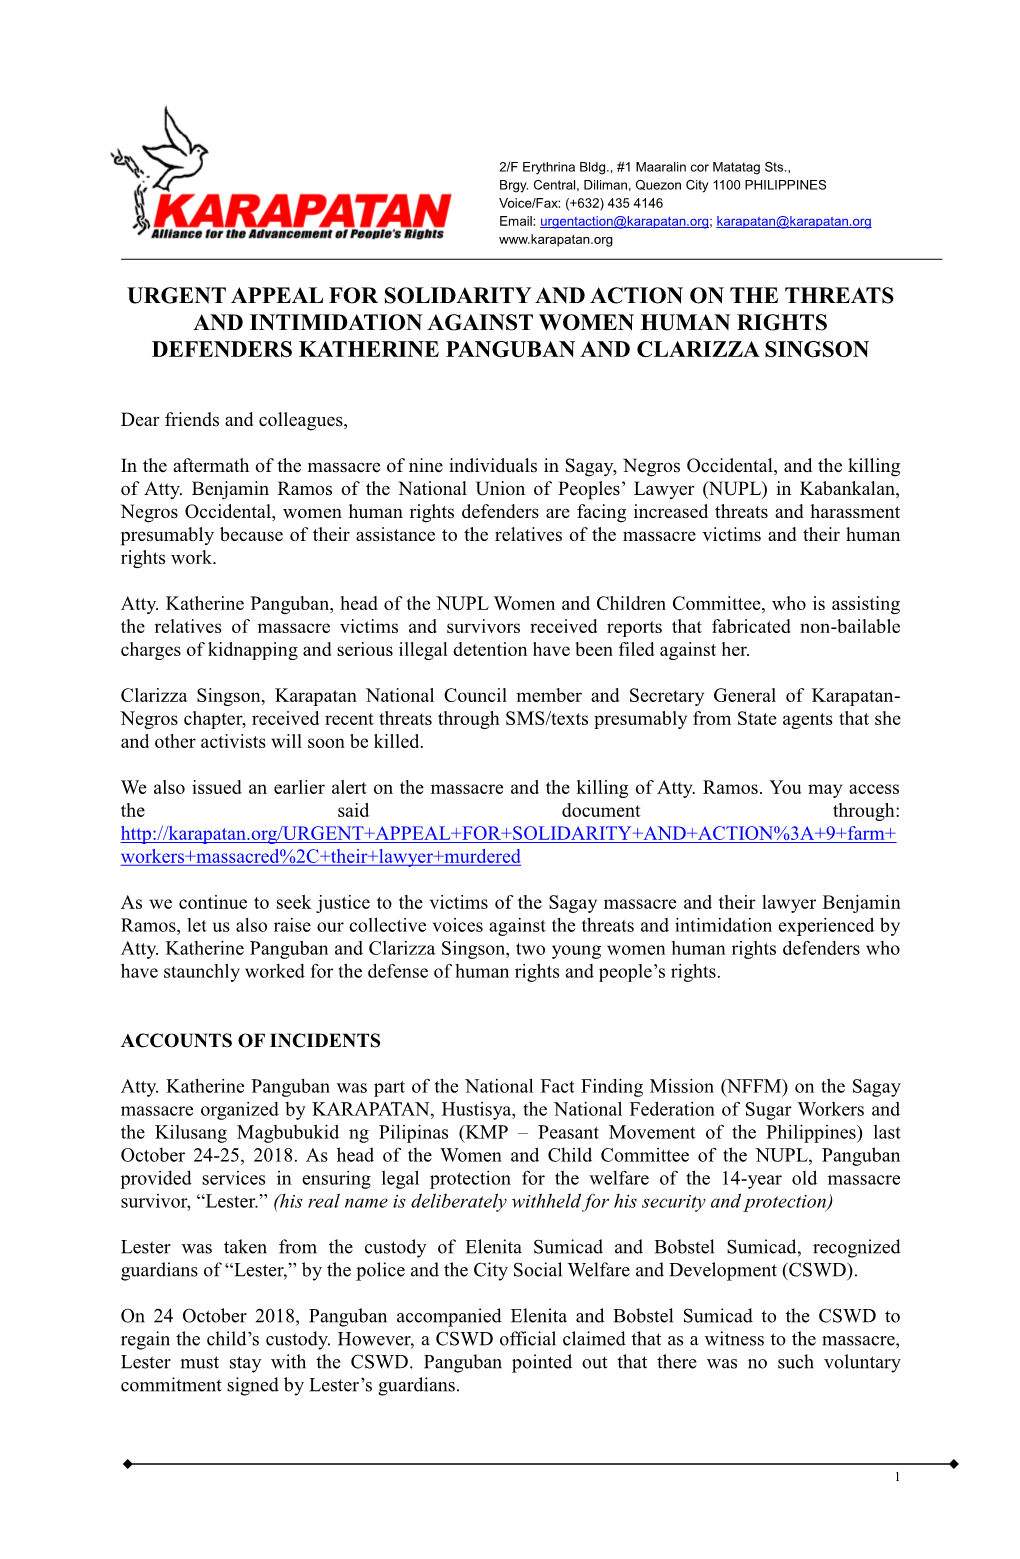 Urgent Appeal for Solidarity and Action on the Threats and Intimidation Against Women Human Rights Defenders Katherine Panguban and Clarizza Singson